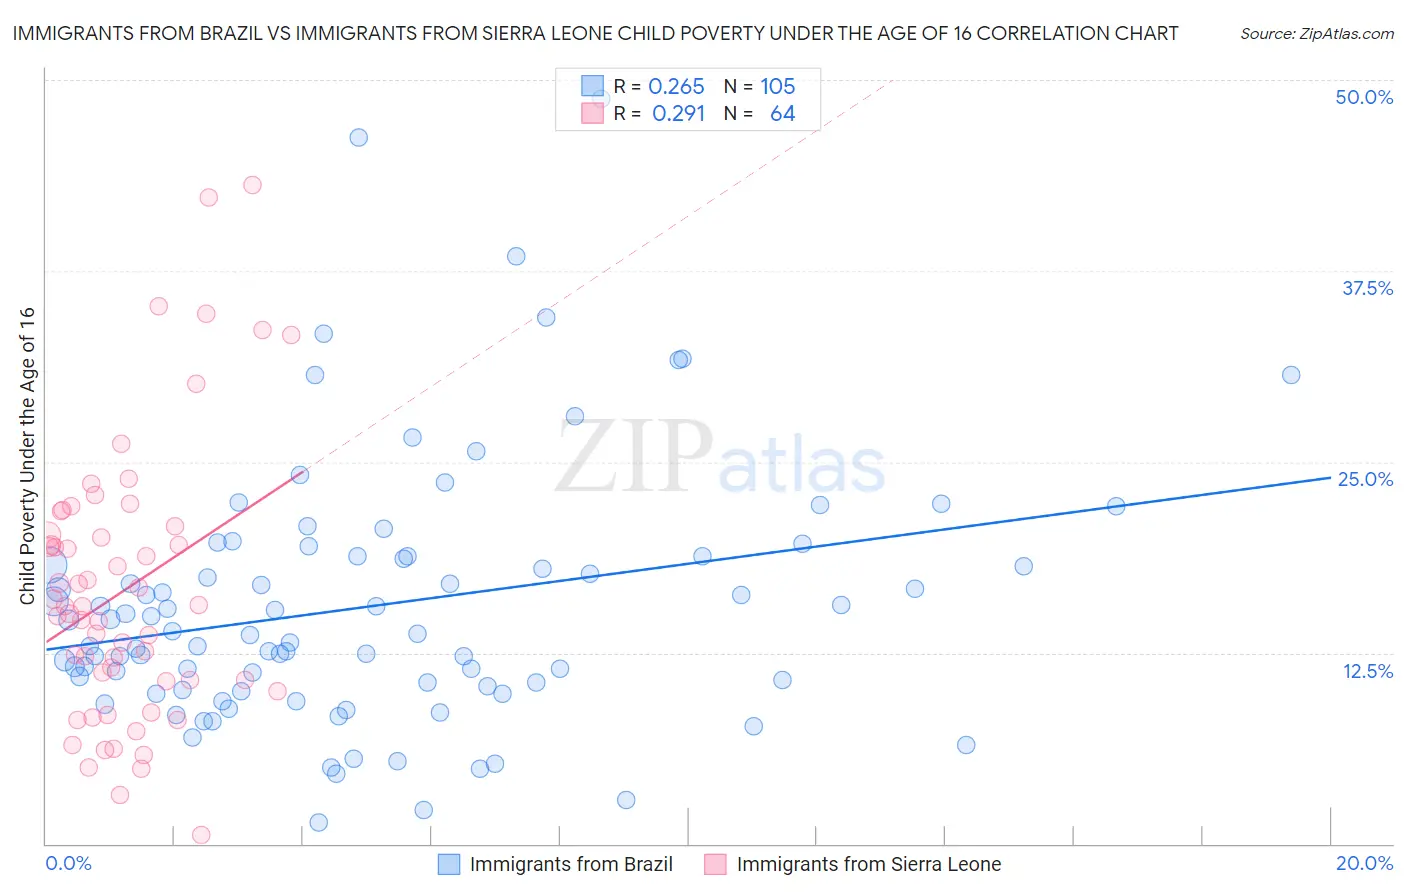 Immigrants from Brazil vs Immigrants from Sierra Leone Child Poverty Under the Age of 16